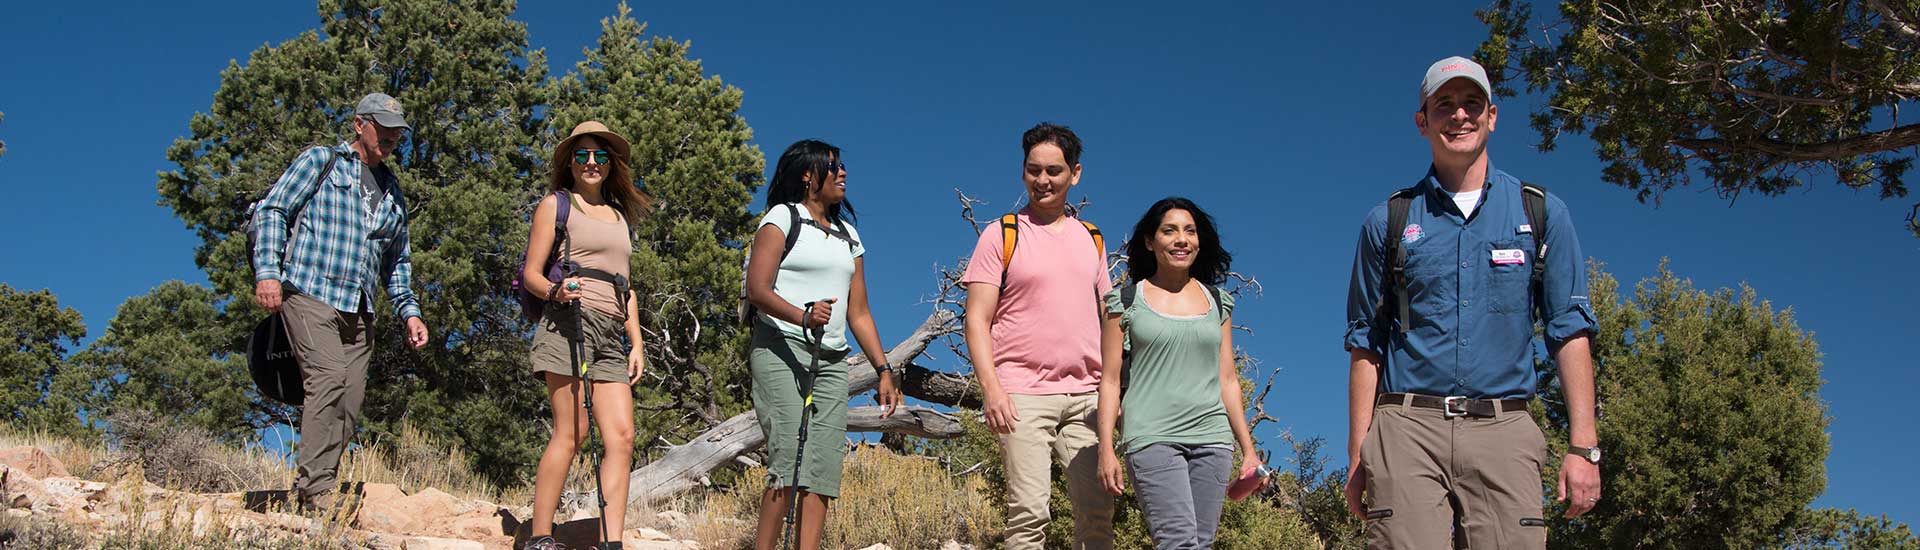 Pink Jeep® adventure guide and guests hiking the Hermit Trail at Grand Canyon National Park.